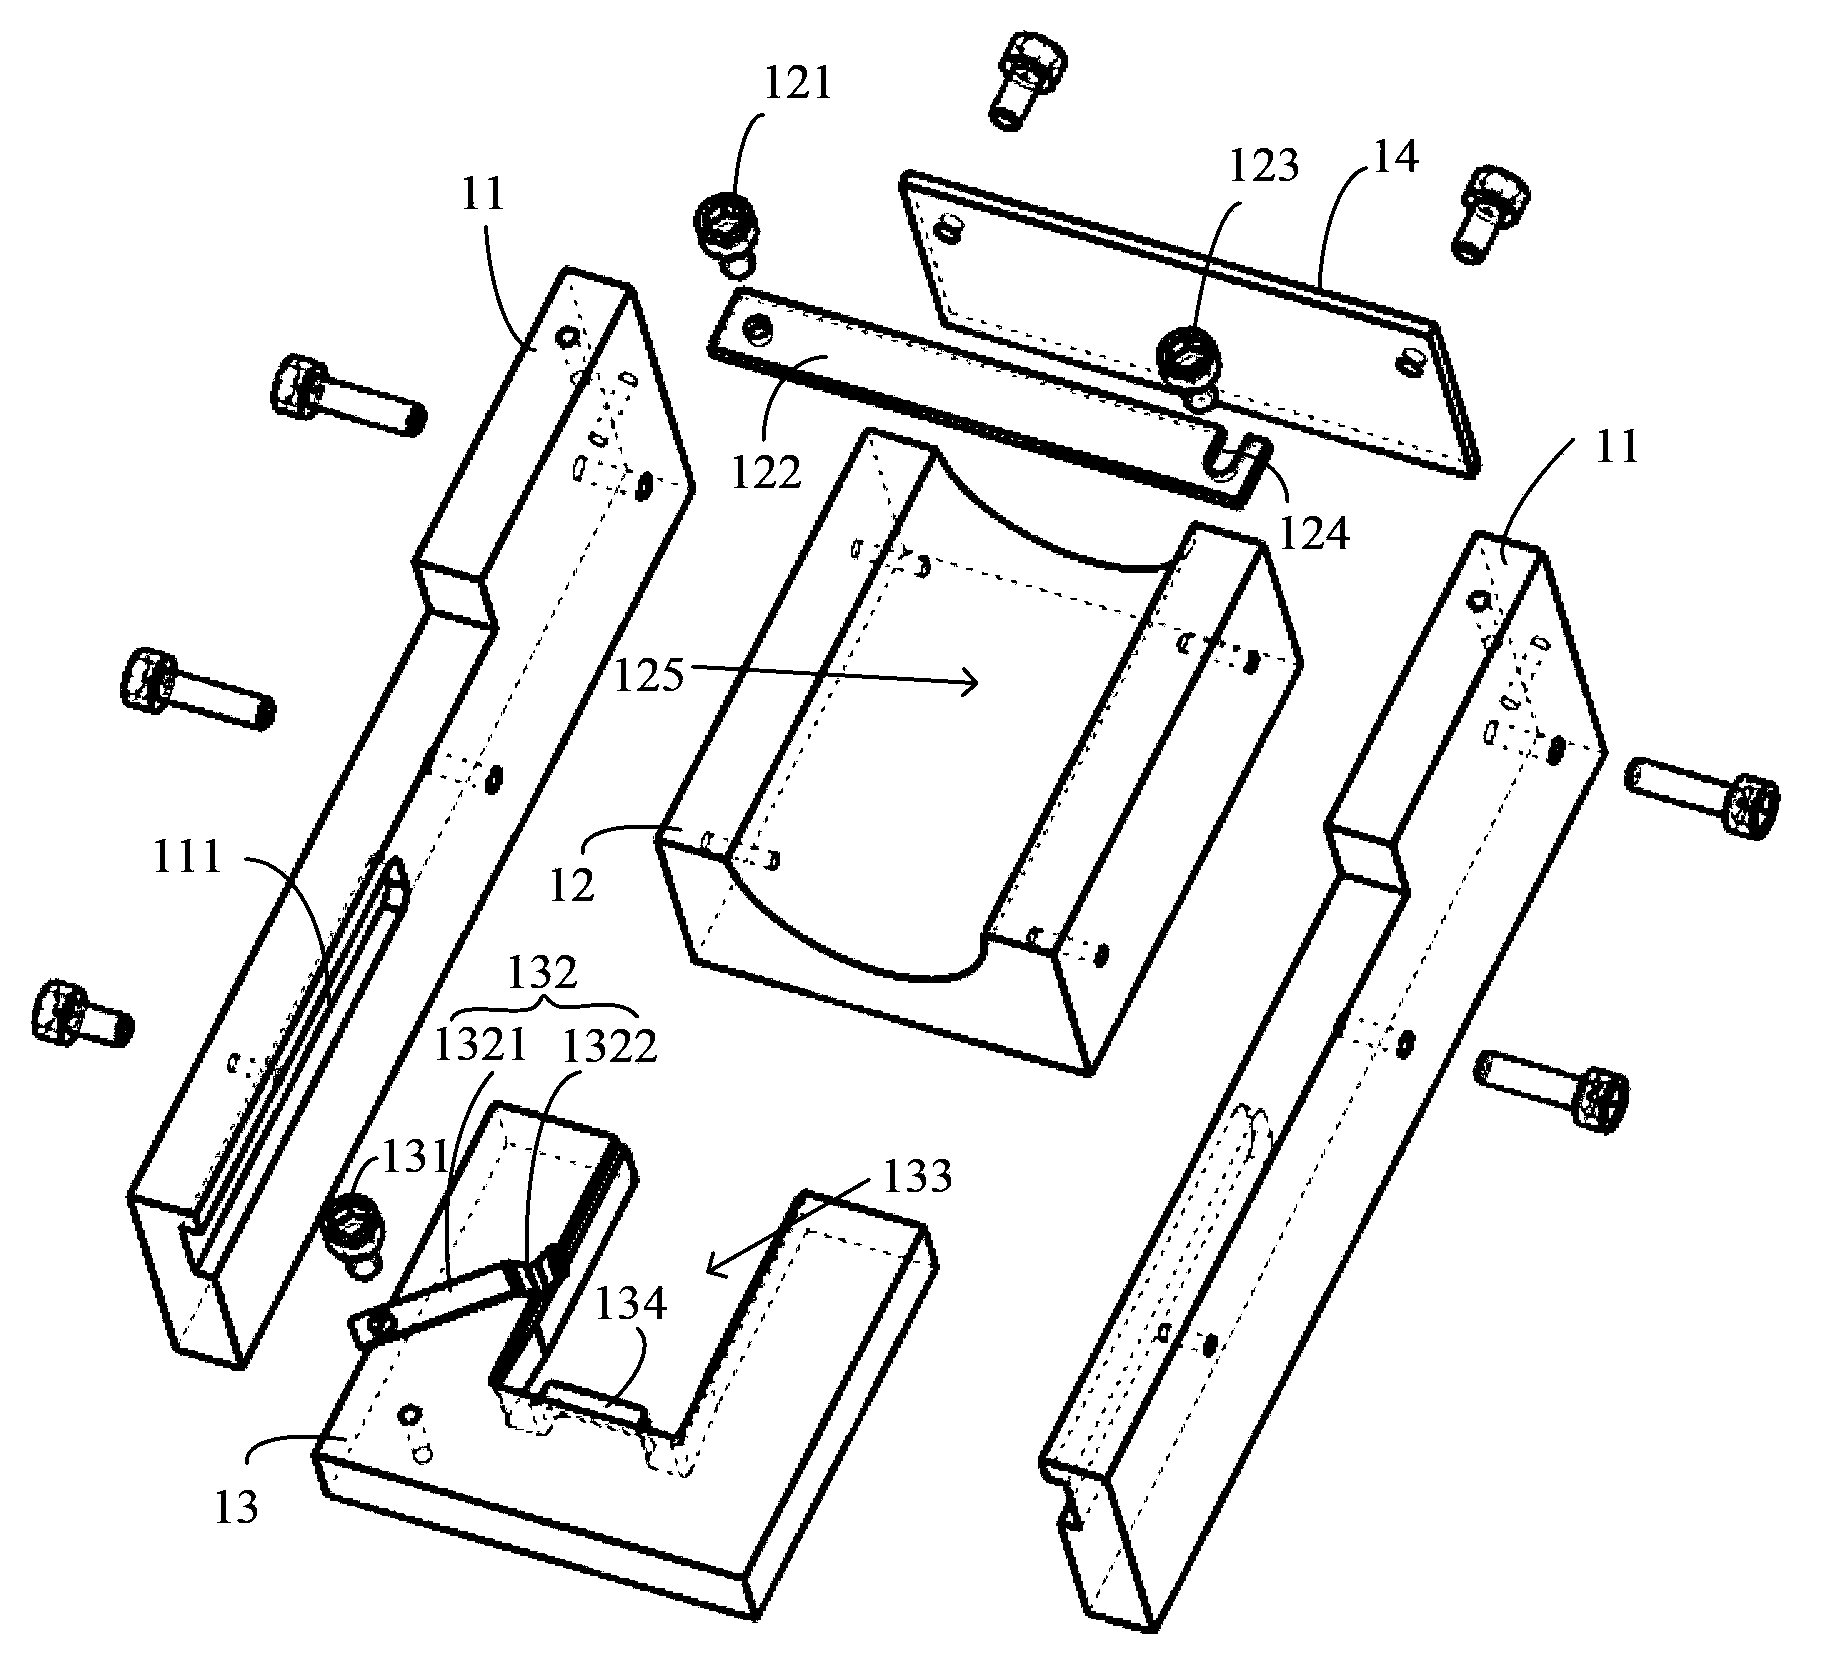 Welding device for photomultiplier and voltage divider